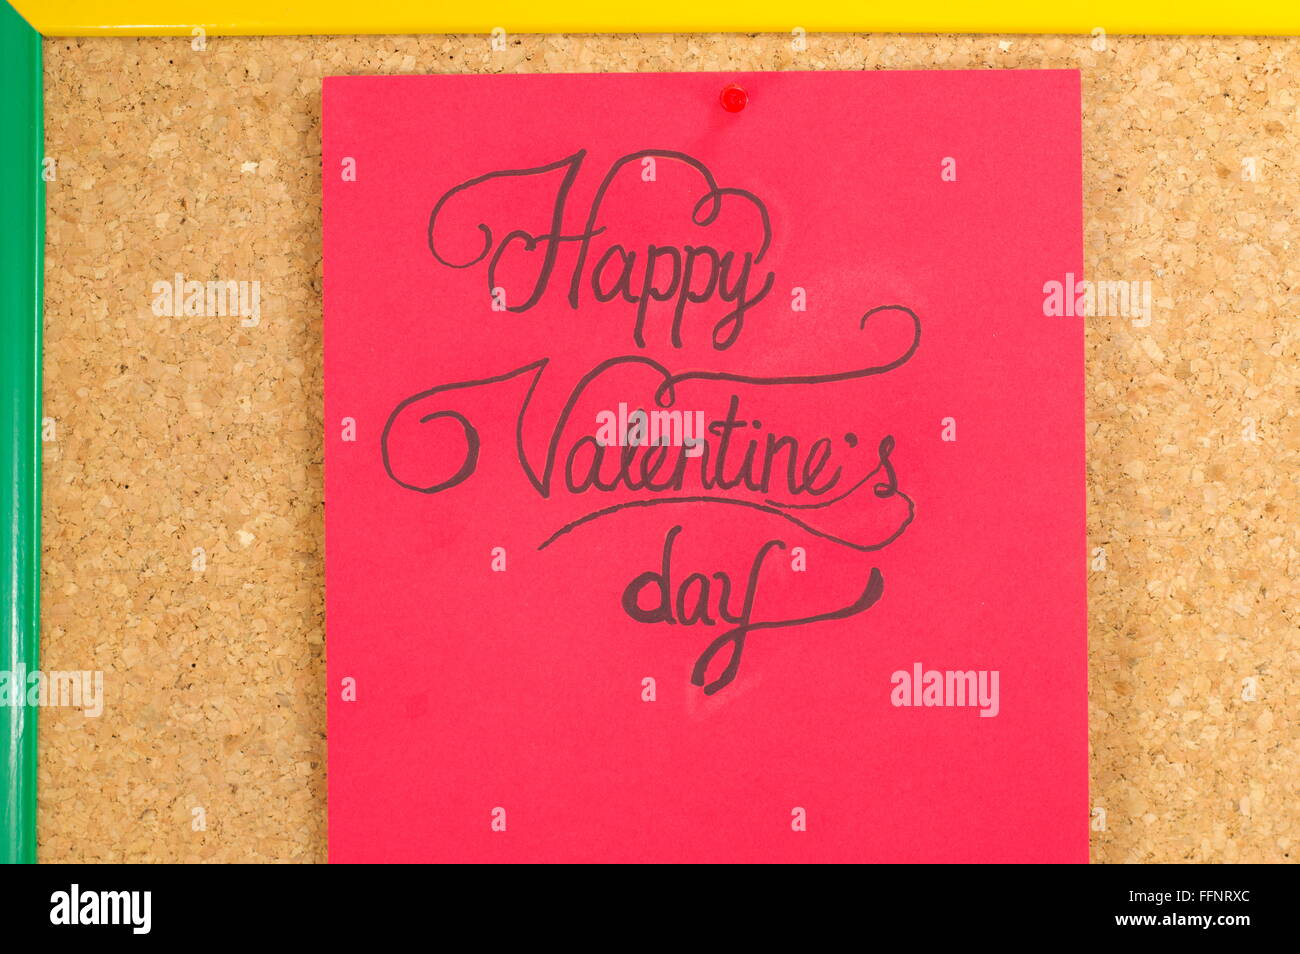 red card with a handwritten Happy Valentine's inscription on a board Stock Photo